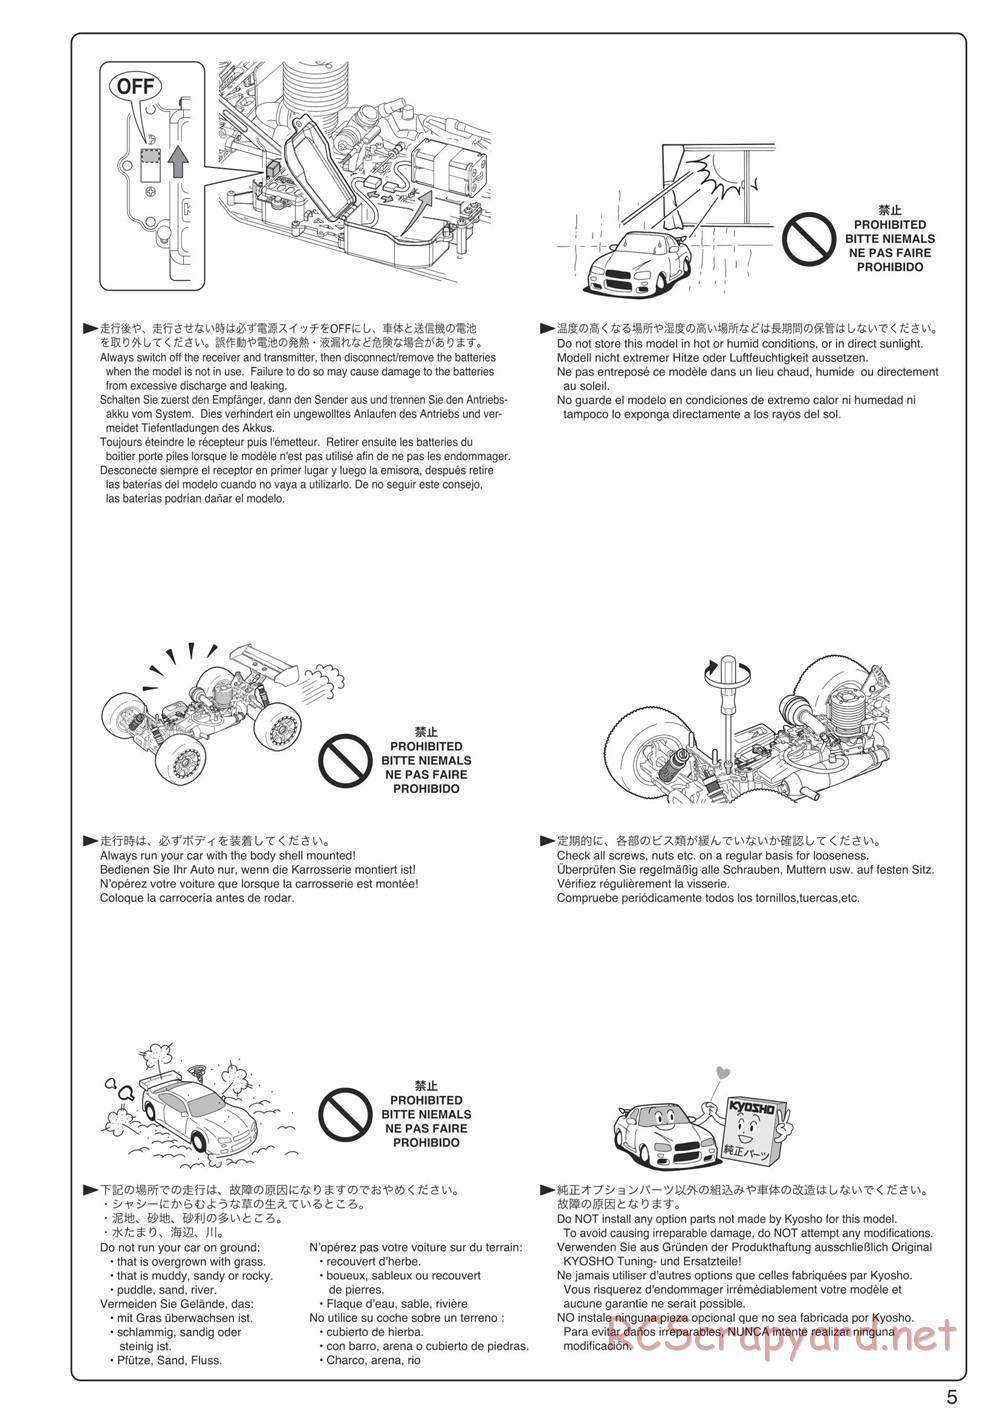 Kyosho - Inferno Neo ST 3.0 - Manual - Page 5